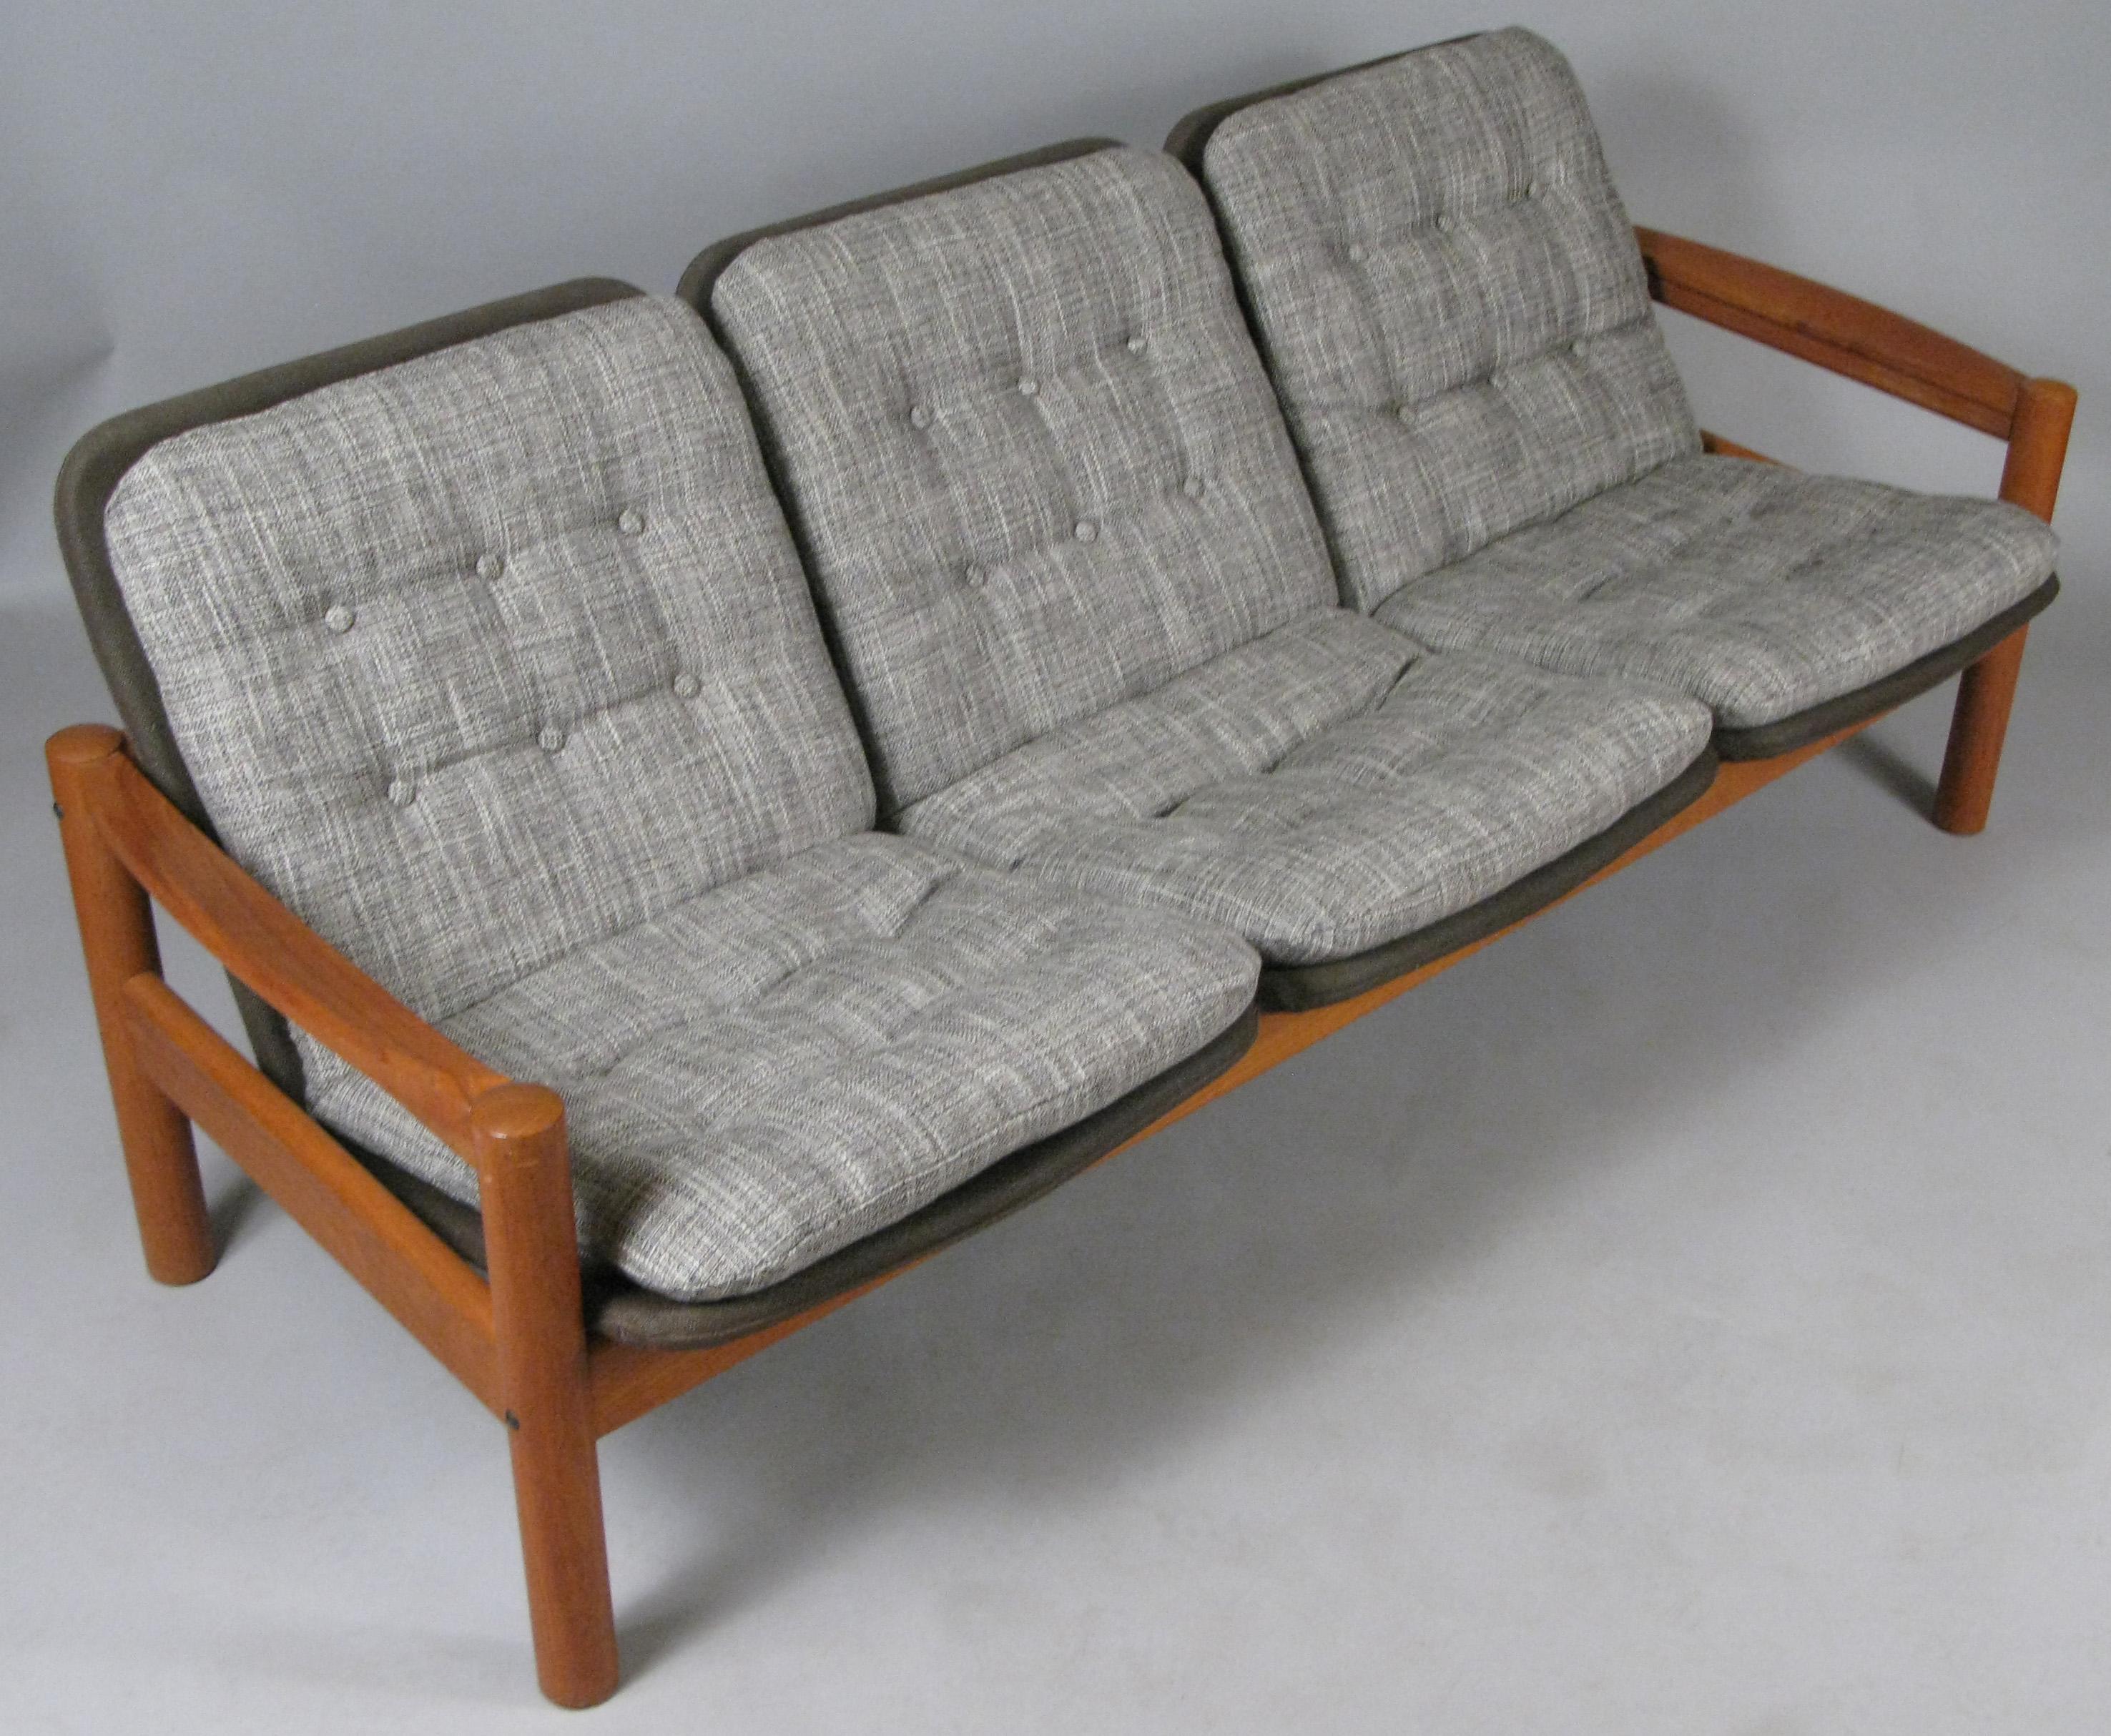 A very handsome solid teak vintage 1970s three seat sofa made by Domino Mobler. With it's original brown linen covered seat frames, and newly upholstered button tufted seat covers in a woven grey and cream. This listing is for the 3 seat sofa only.